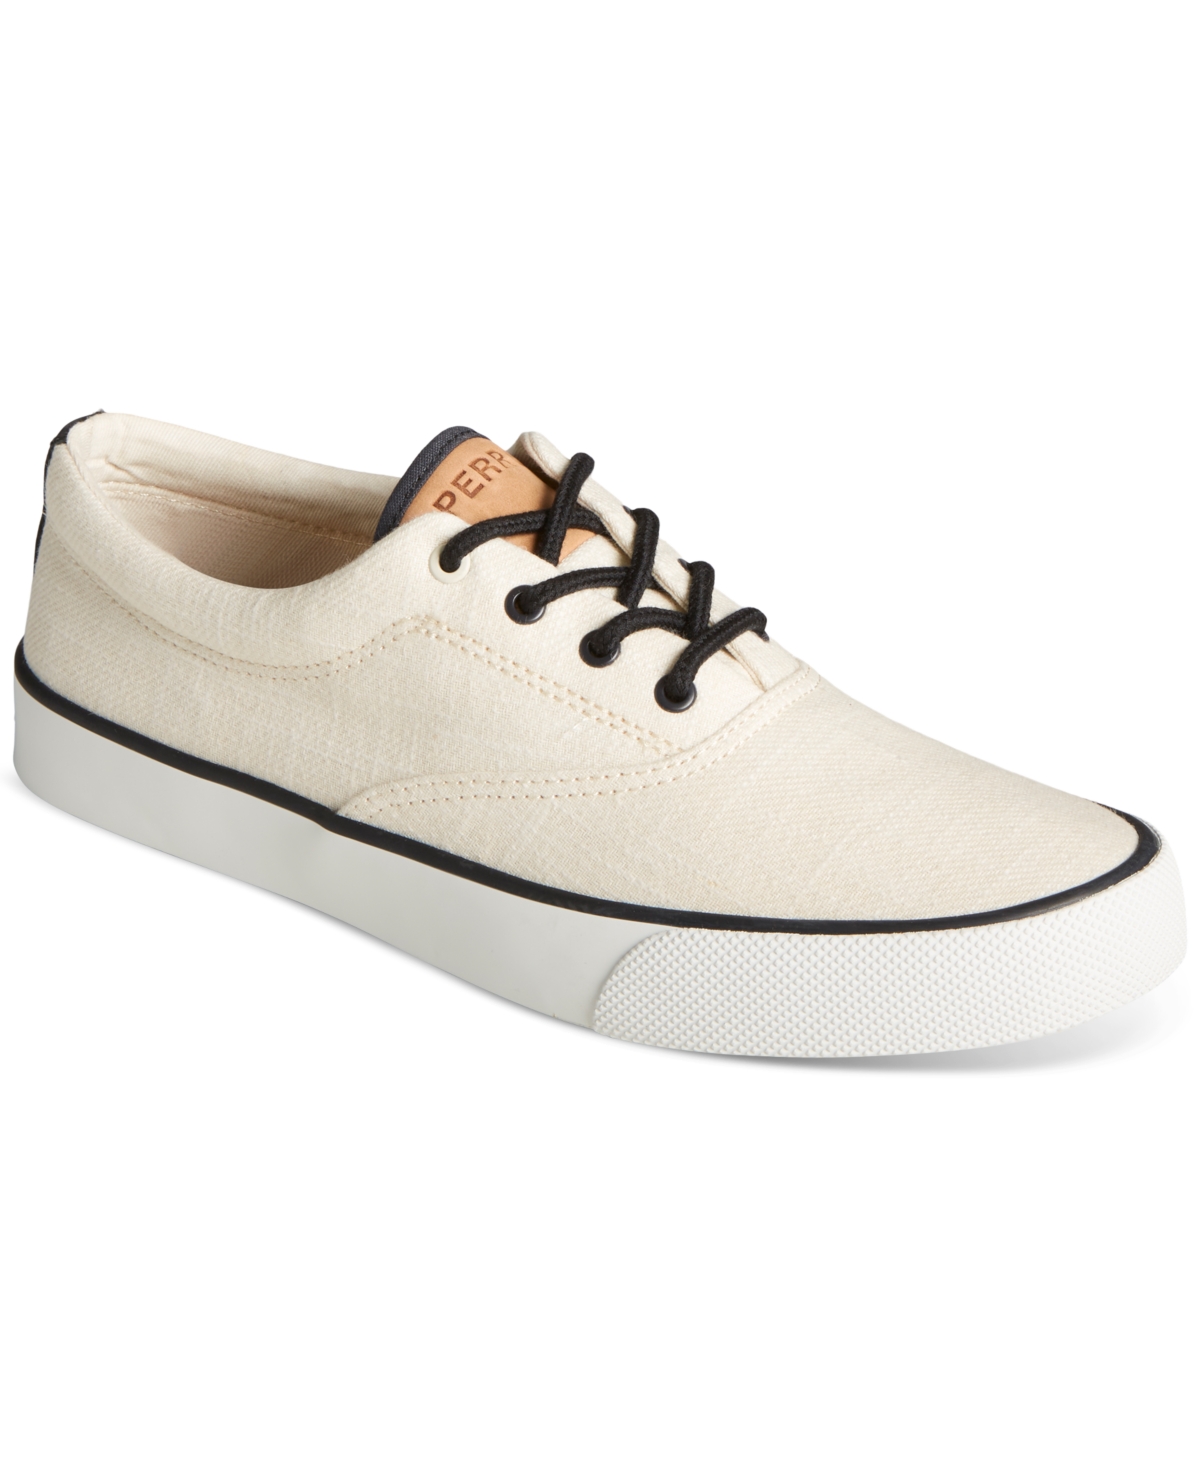 Men's SeaCycled Striper Ii Cvo Textured Lace-Up Sneakers - White